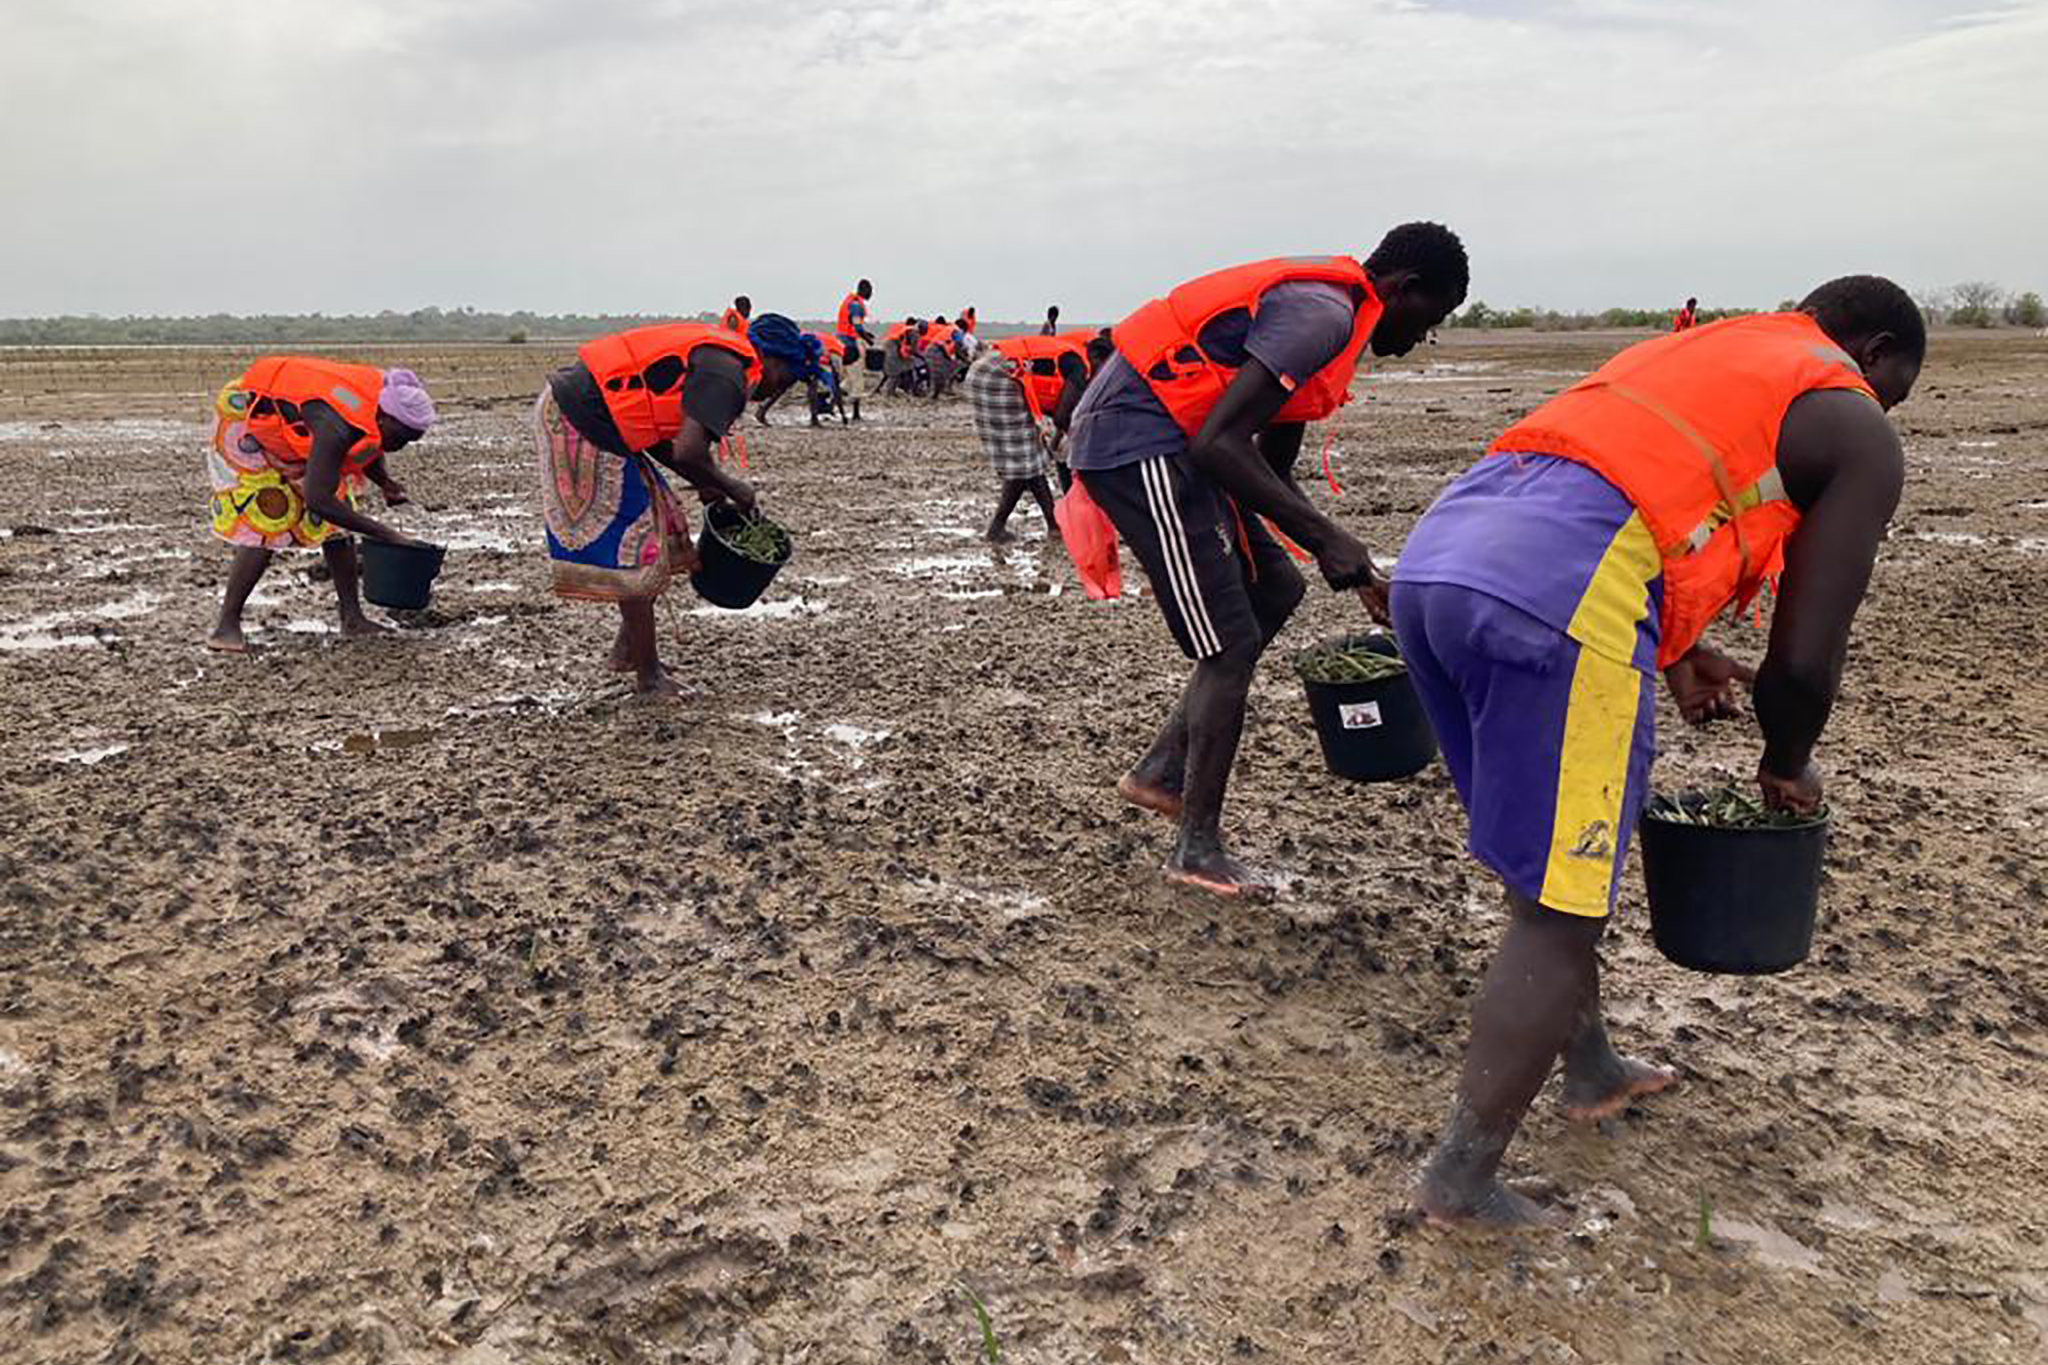 With Oceanium, the most experienced mangrove restoration NGO in Senegal, our goal in Casamance is to replant mangroves over 2245 hectares at a density of 5000 trees per hectare and re-establish sustainable and profitable mangrove-friendly fishing and farming activities for local communities. © Oceanium